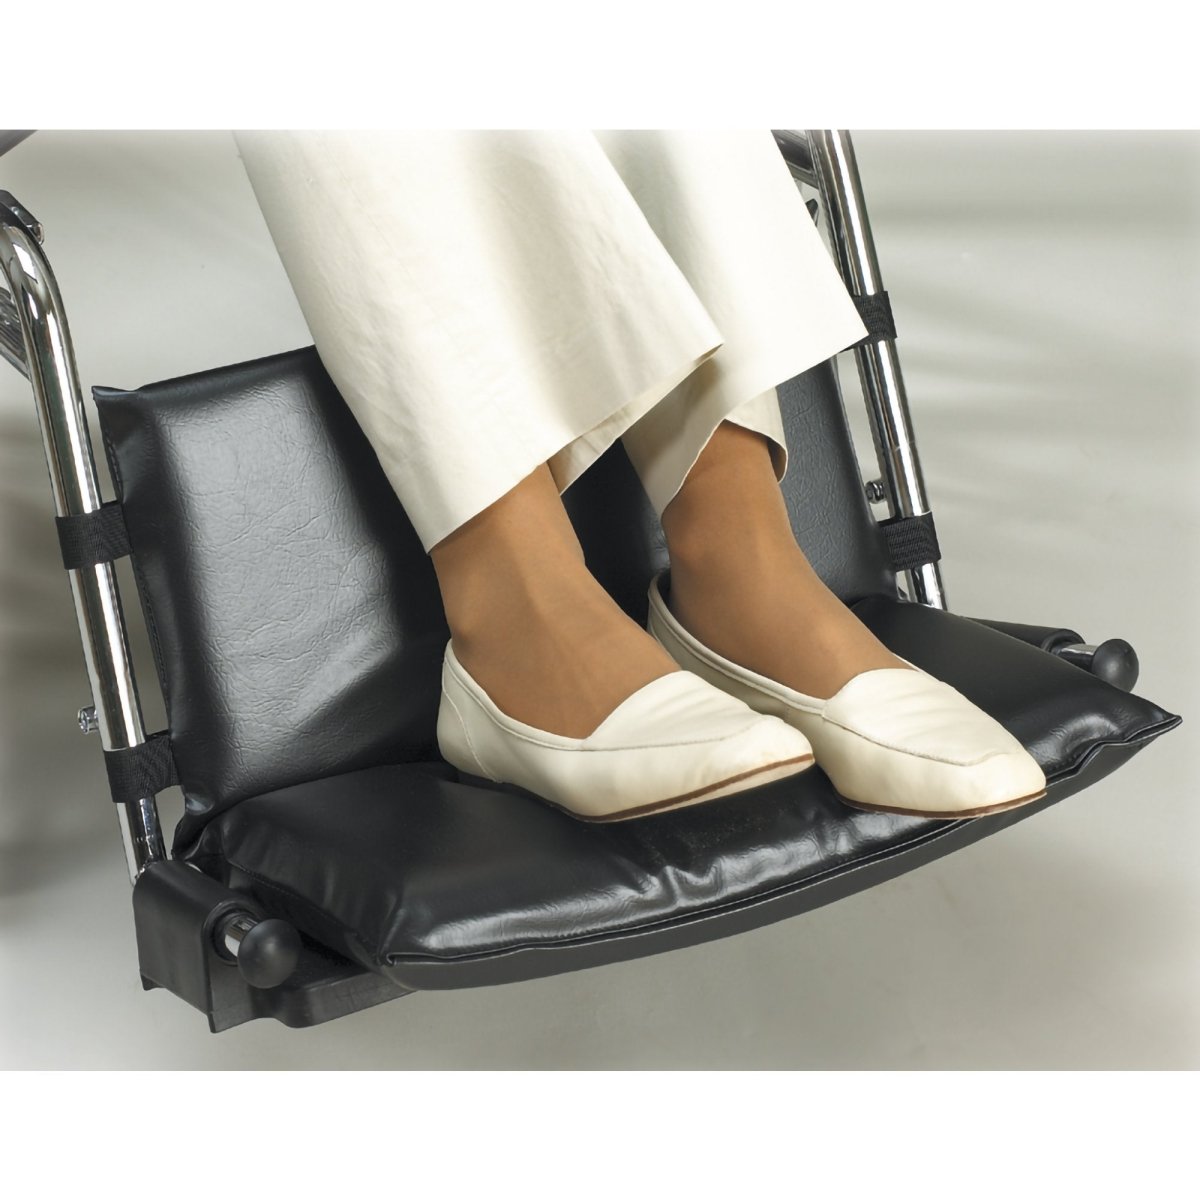 Skil-Care Footrest Extender for Use With Wheelchairs and Geri-Chairs - 649043_EA - 2